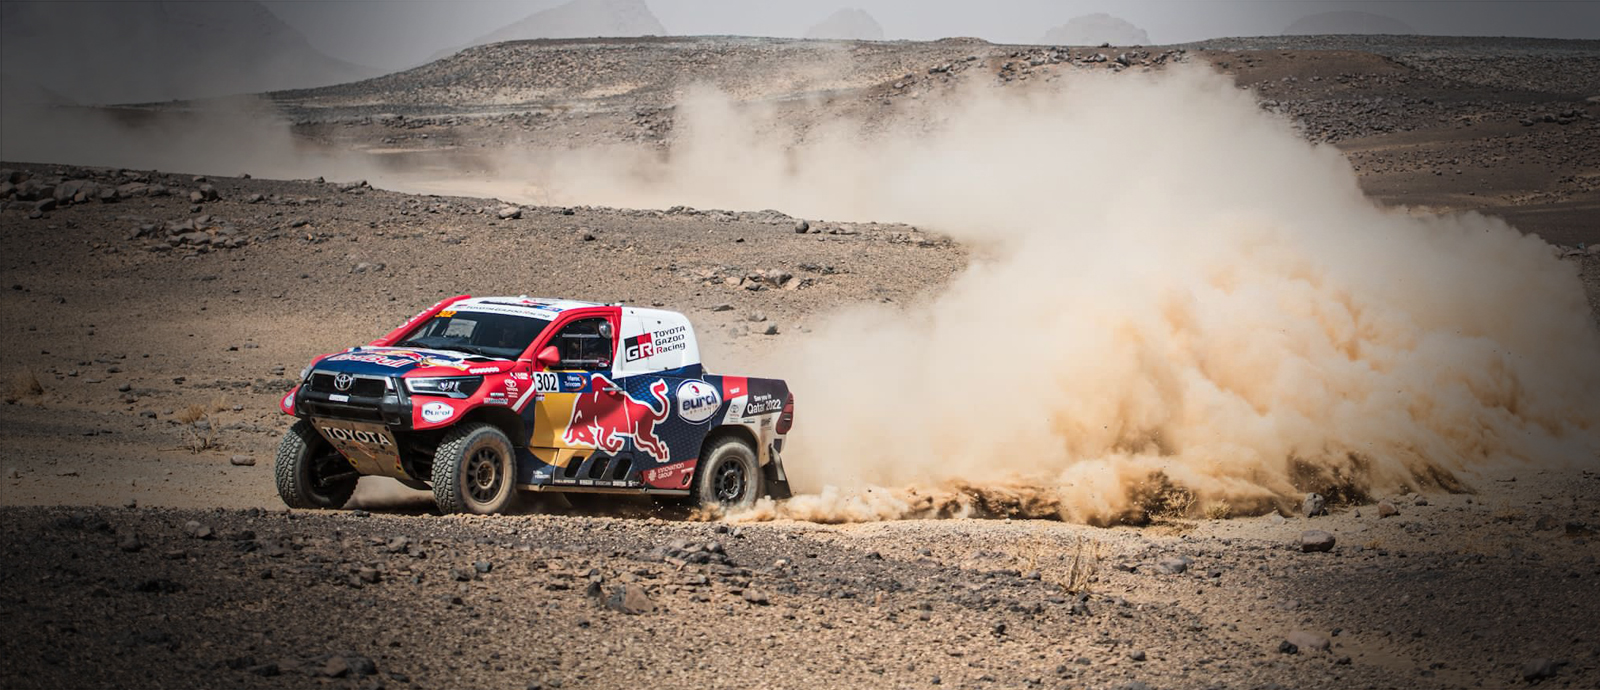 Al-Attiyah takes overall lead